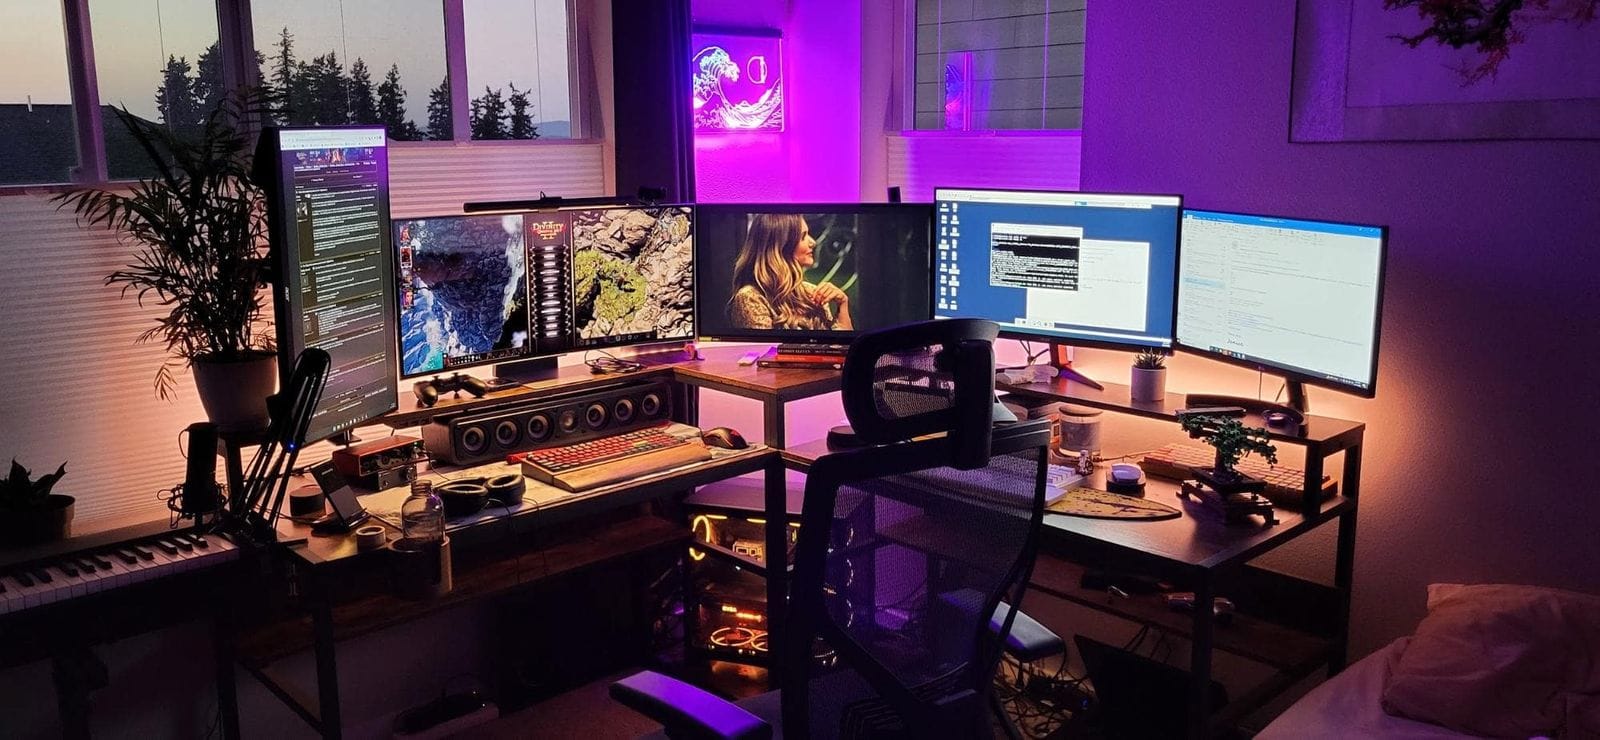 A multi-monitor gaming and work setup in a room at dusk, with ambient purple lighting